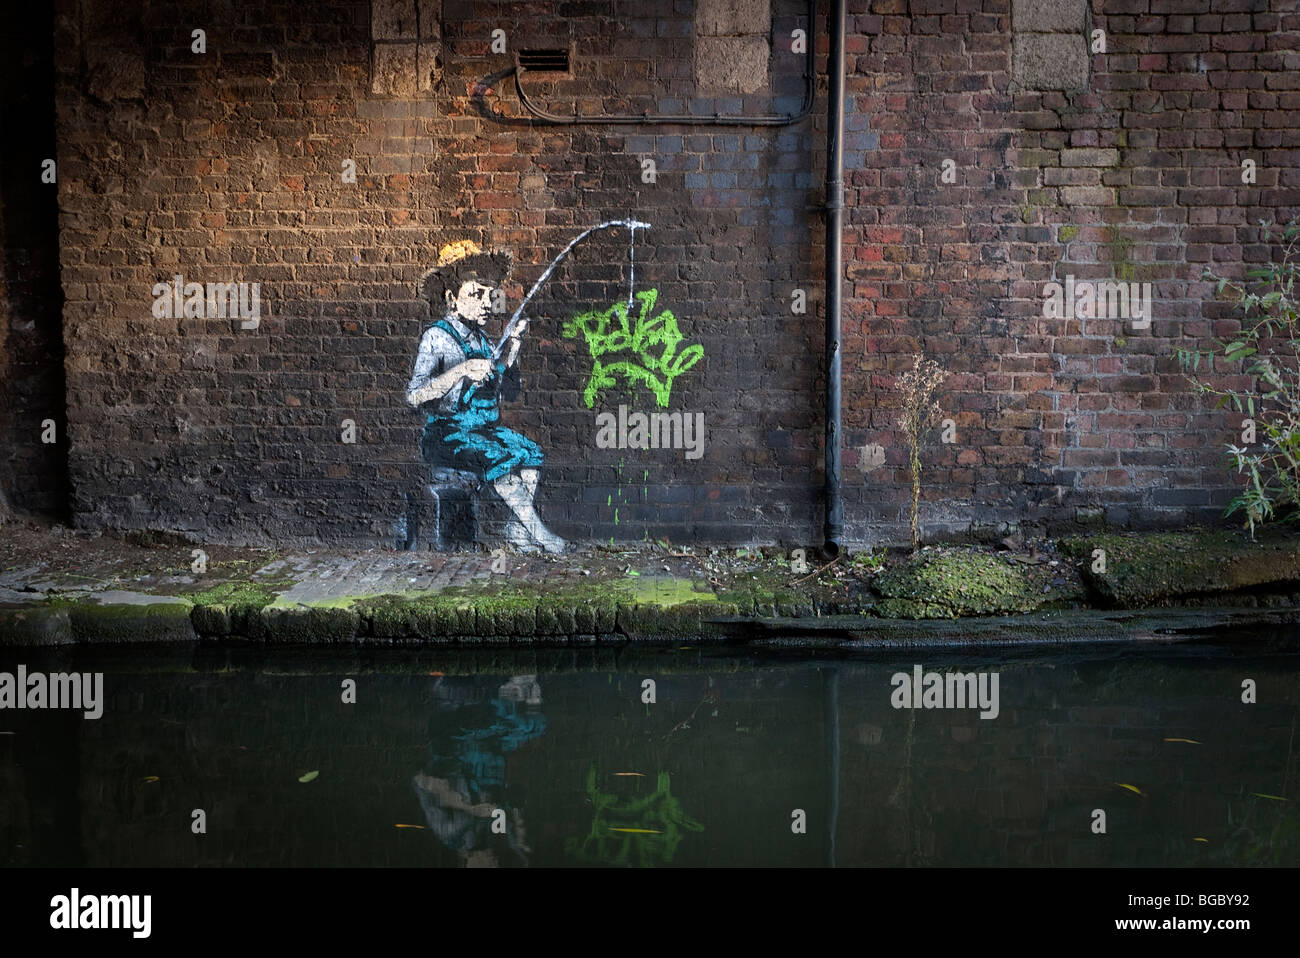 Banksy image of Huckleberry Finn character New graffiti in Camden Lock on Grand Union canal London UK. Stock Photo